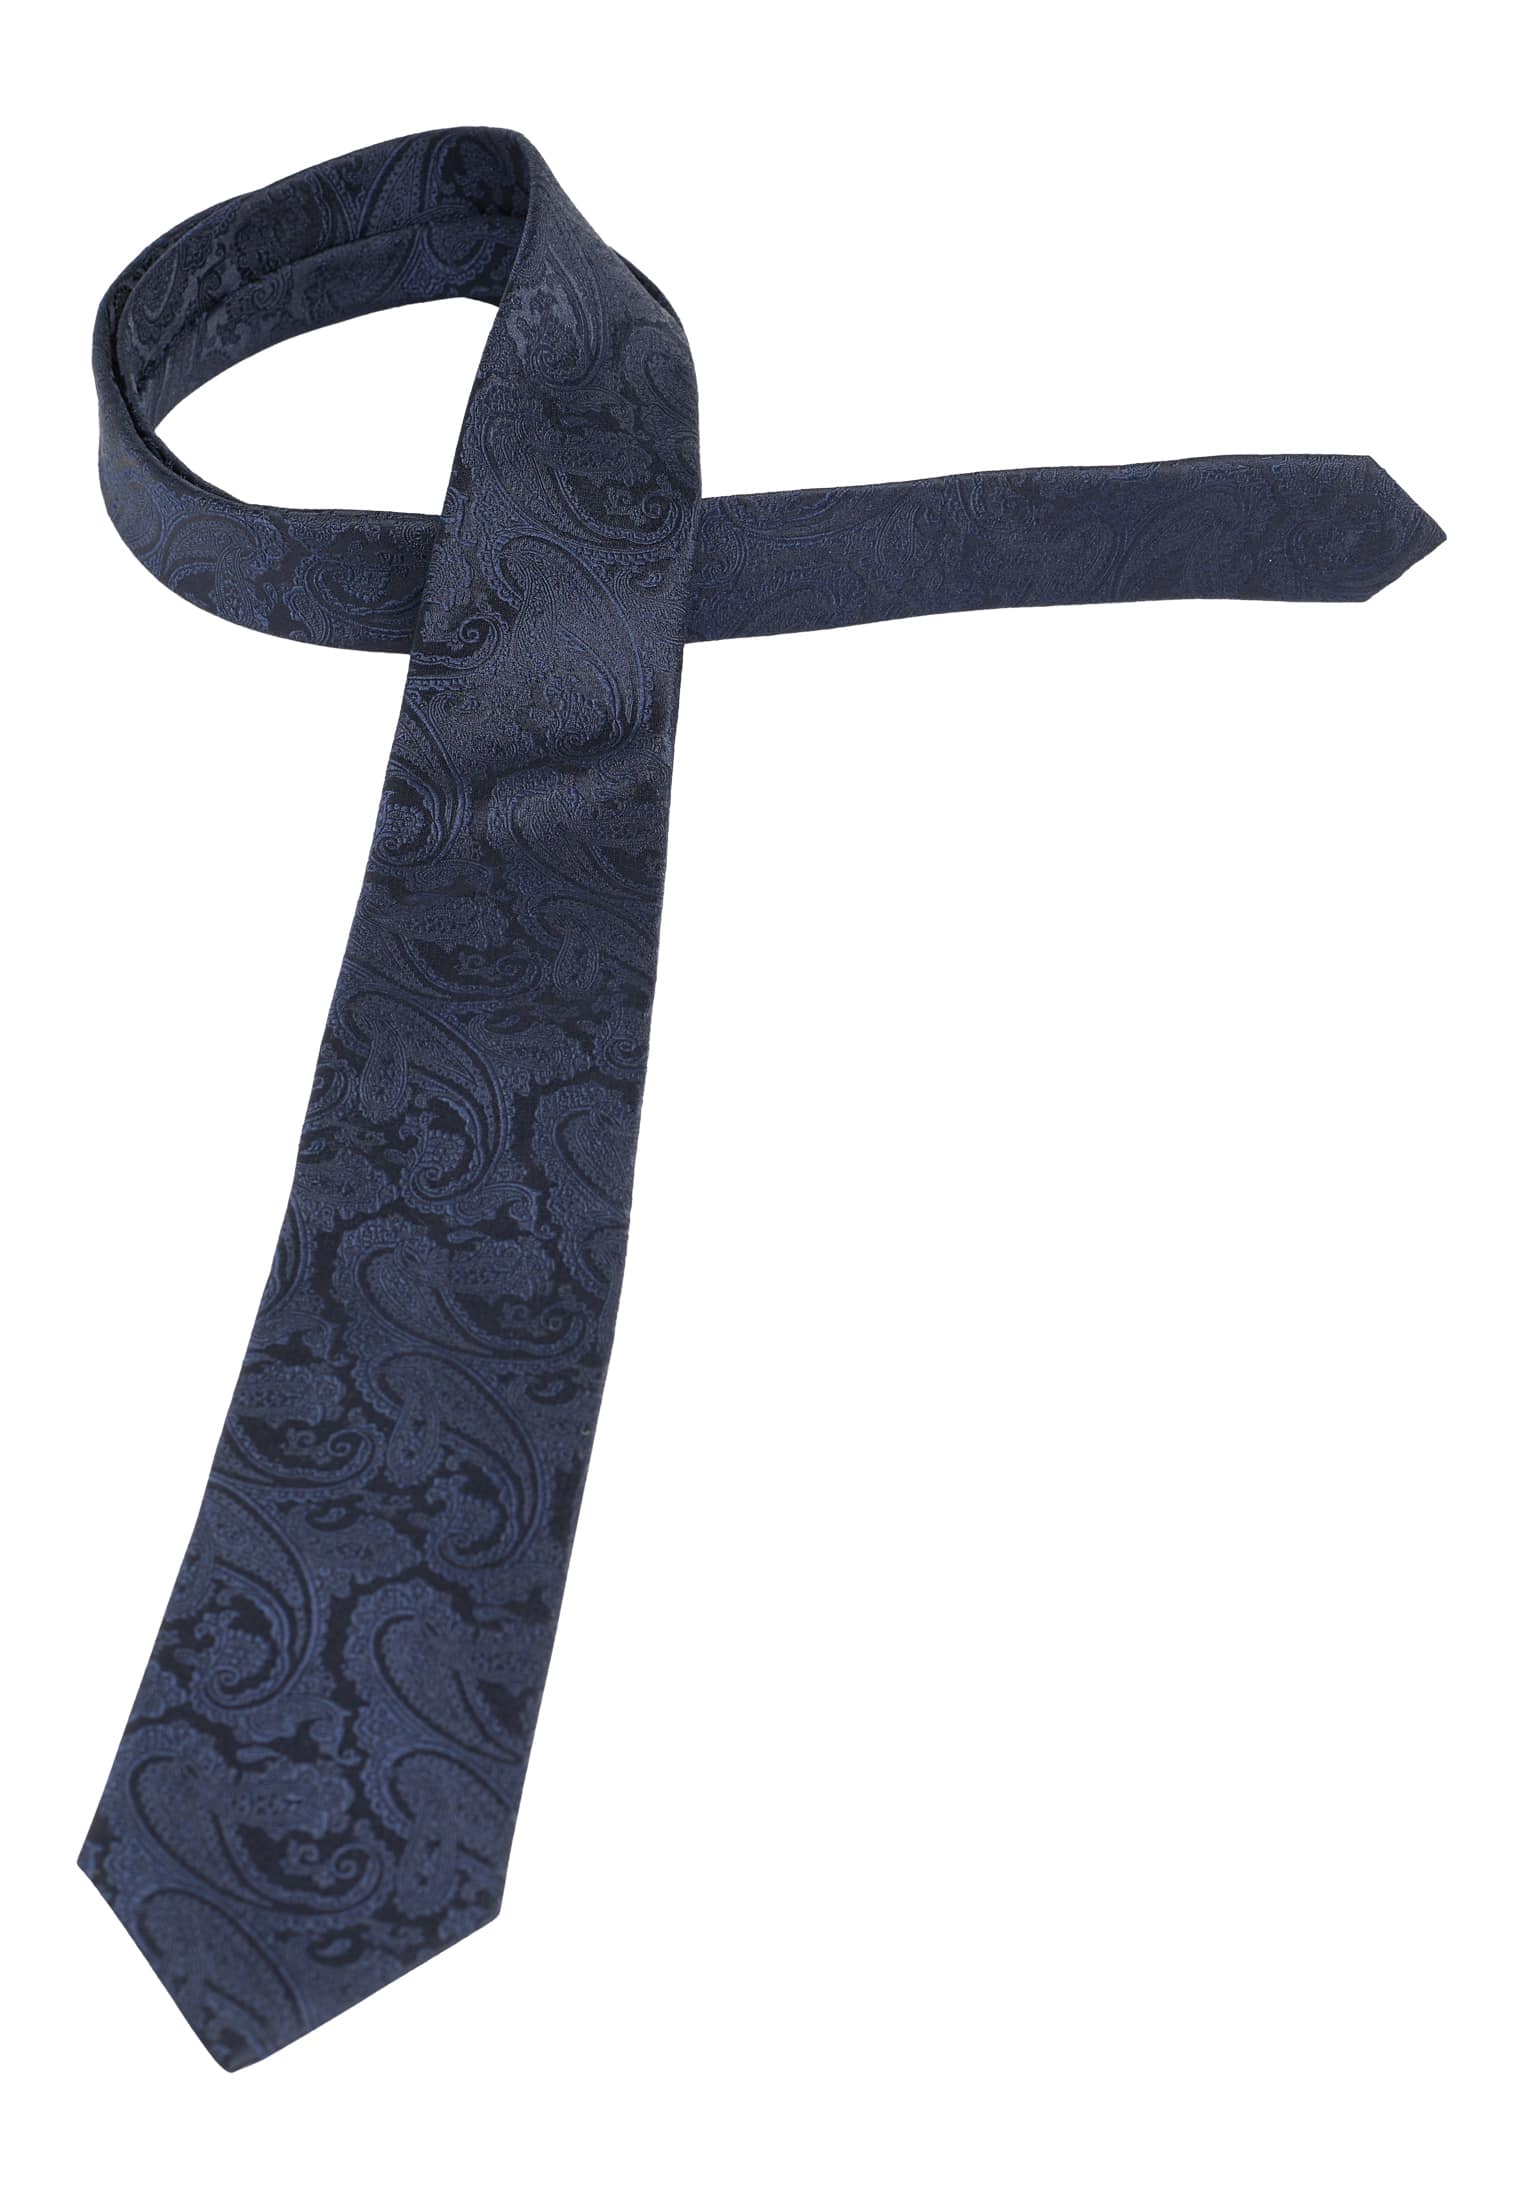 Tie in midnight patterned